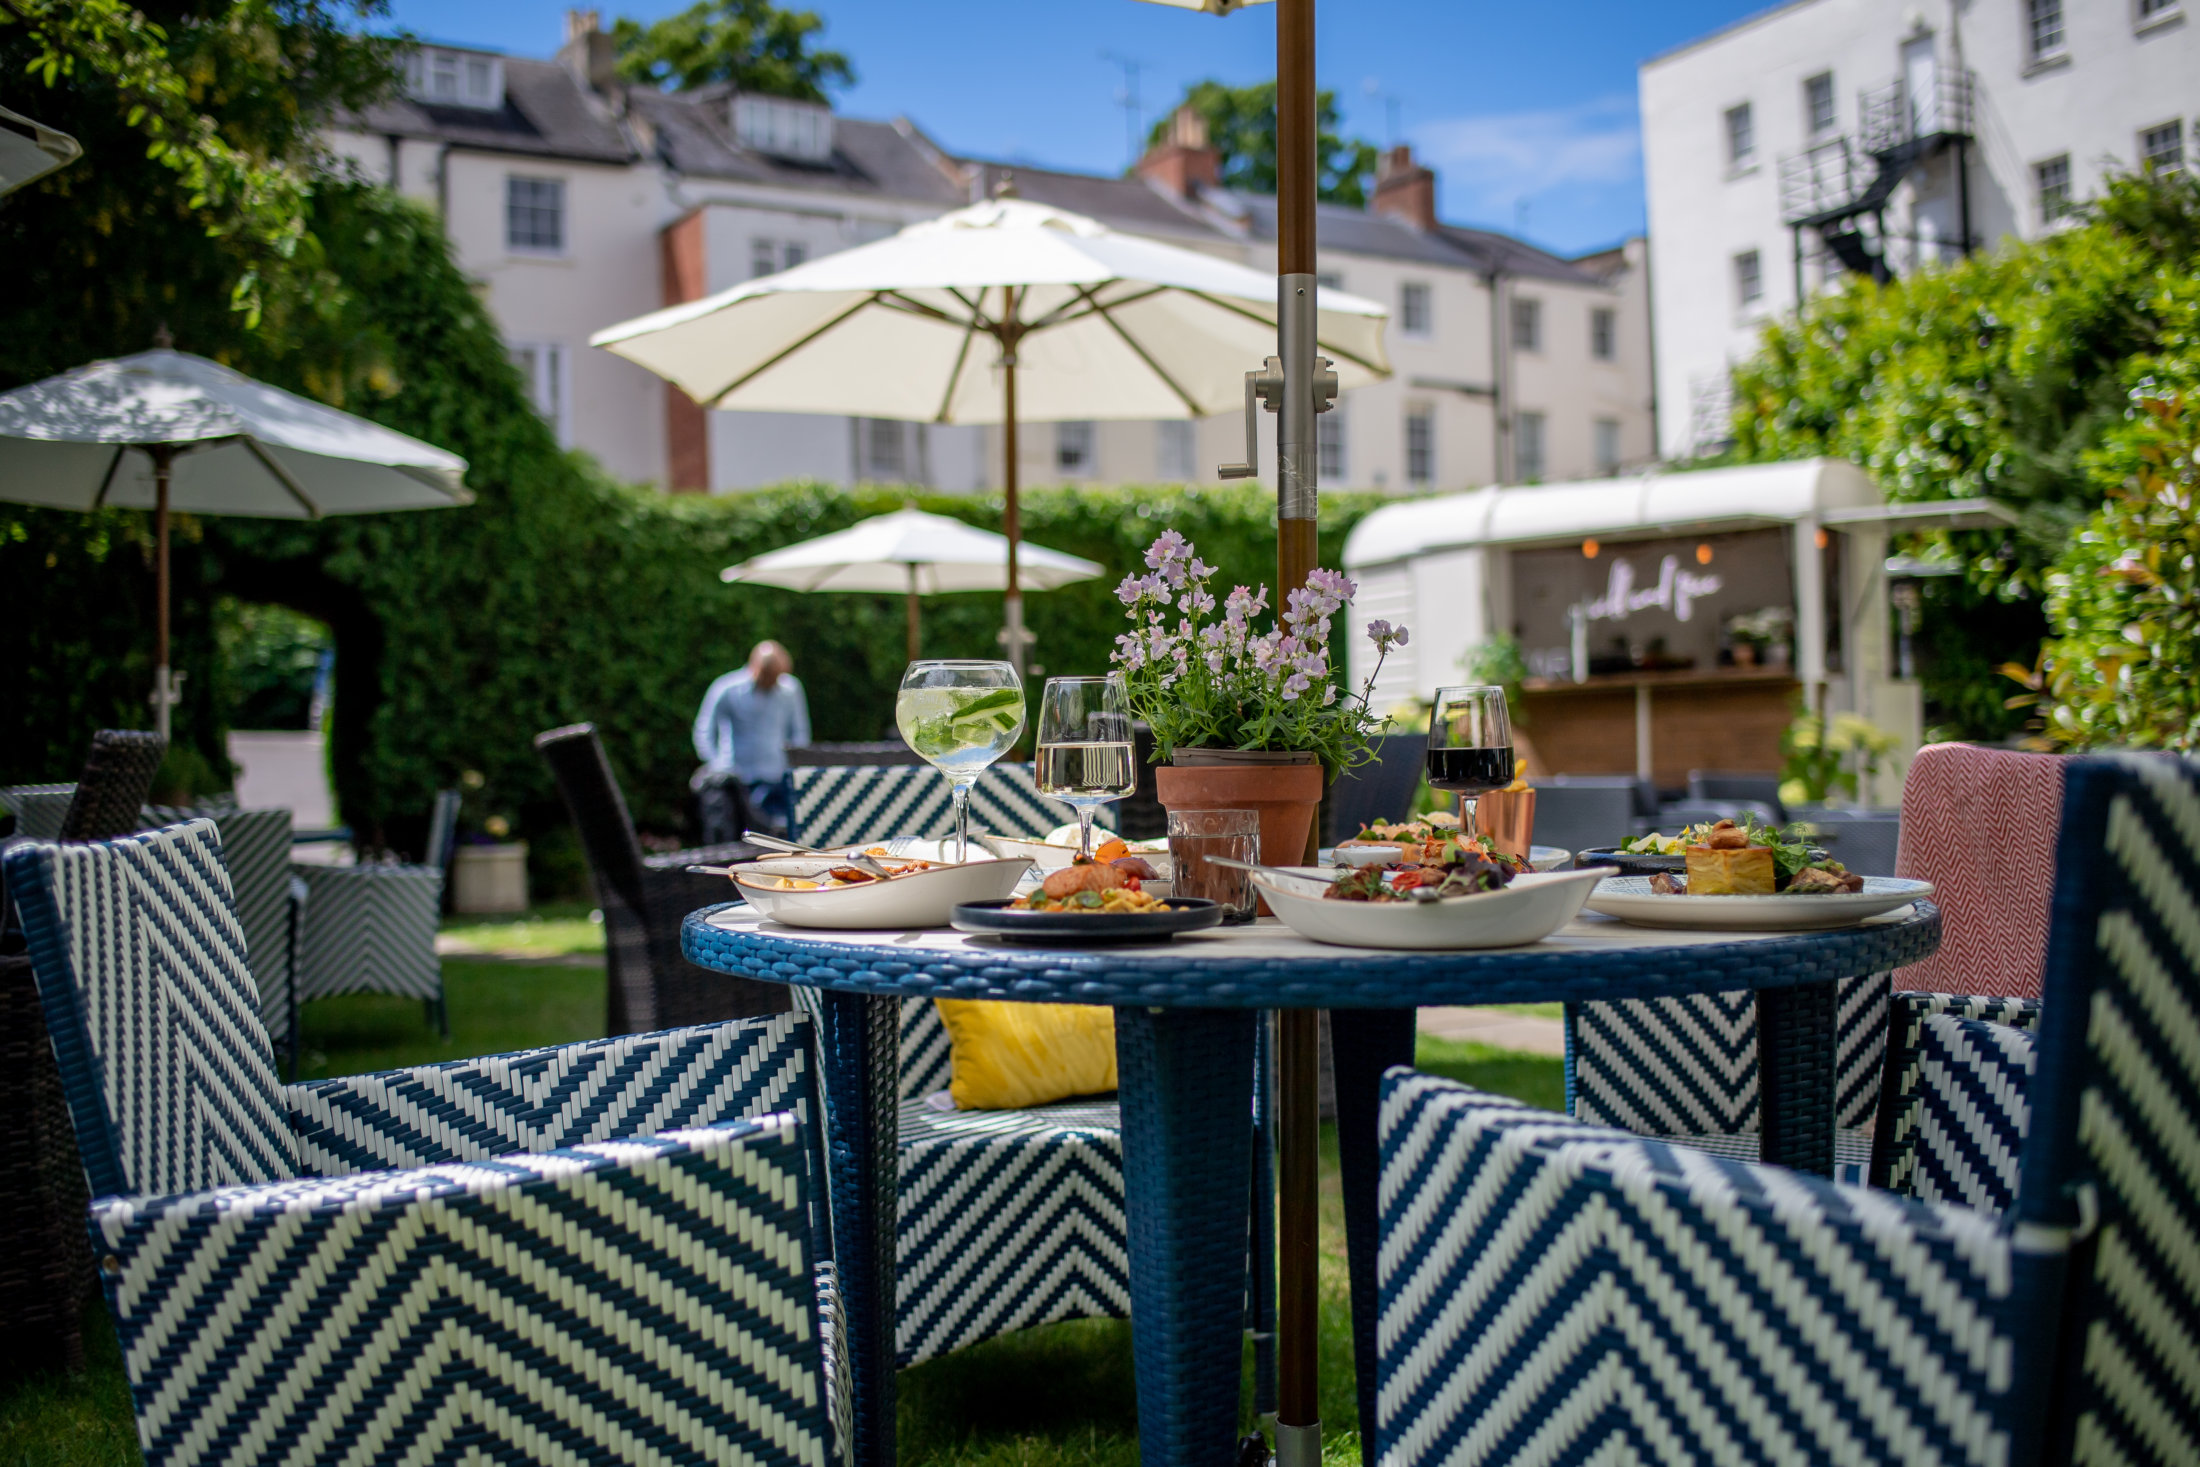 Food and drinks in the summer garden at the Queens Hotel Cheltenham